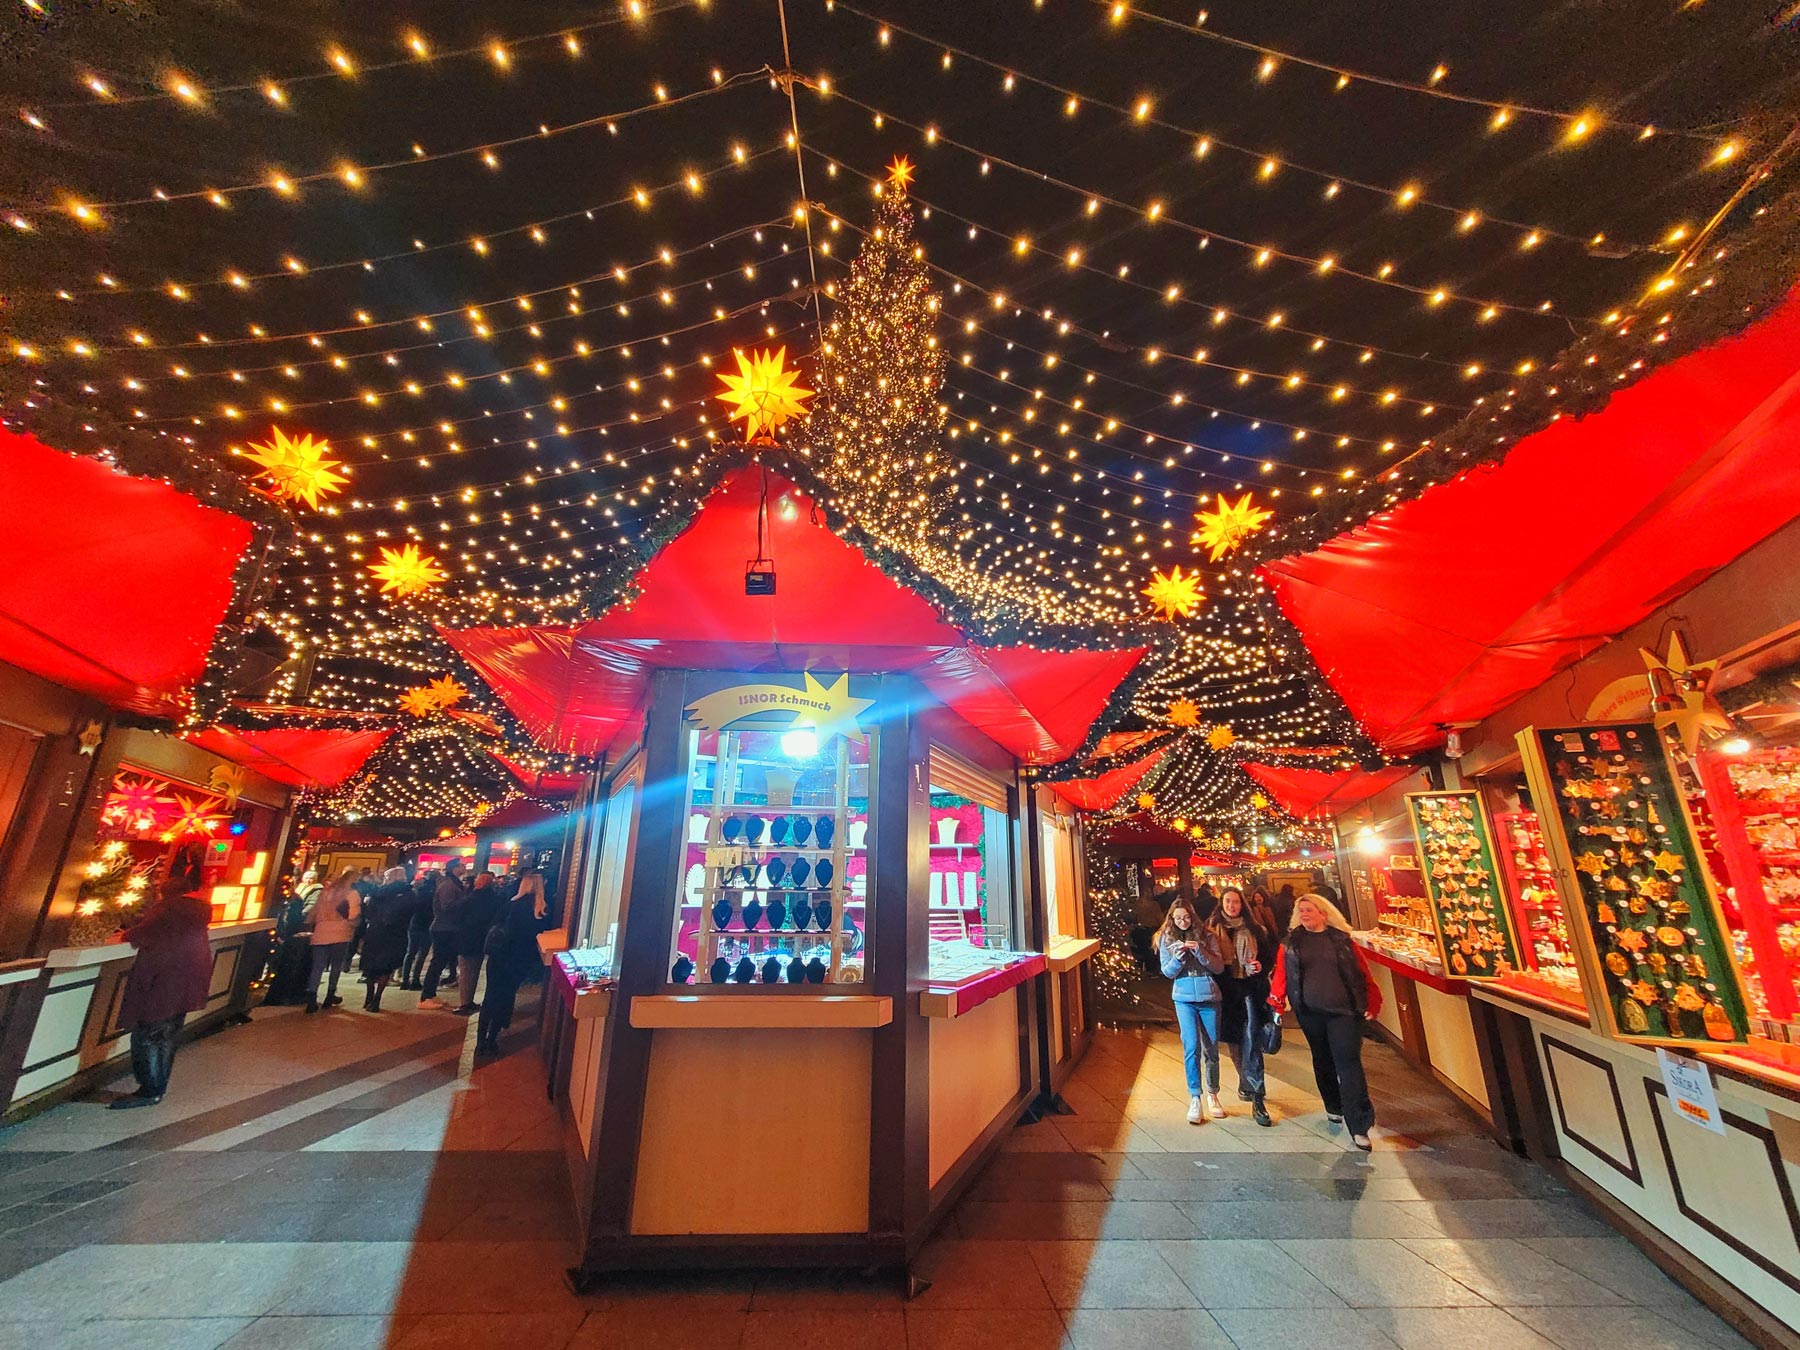 Christmas Market at Cologne Cathedral